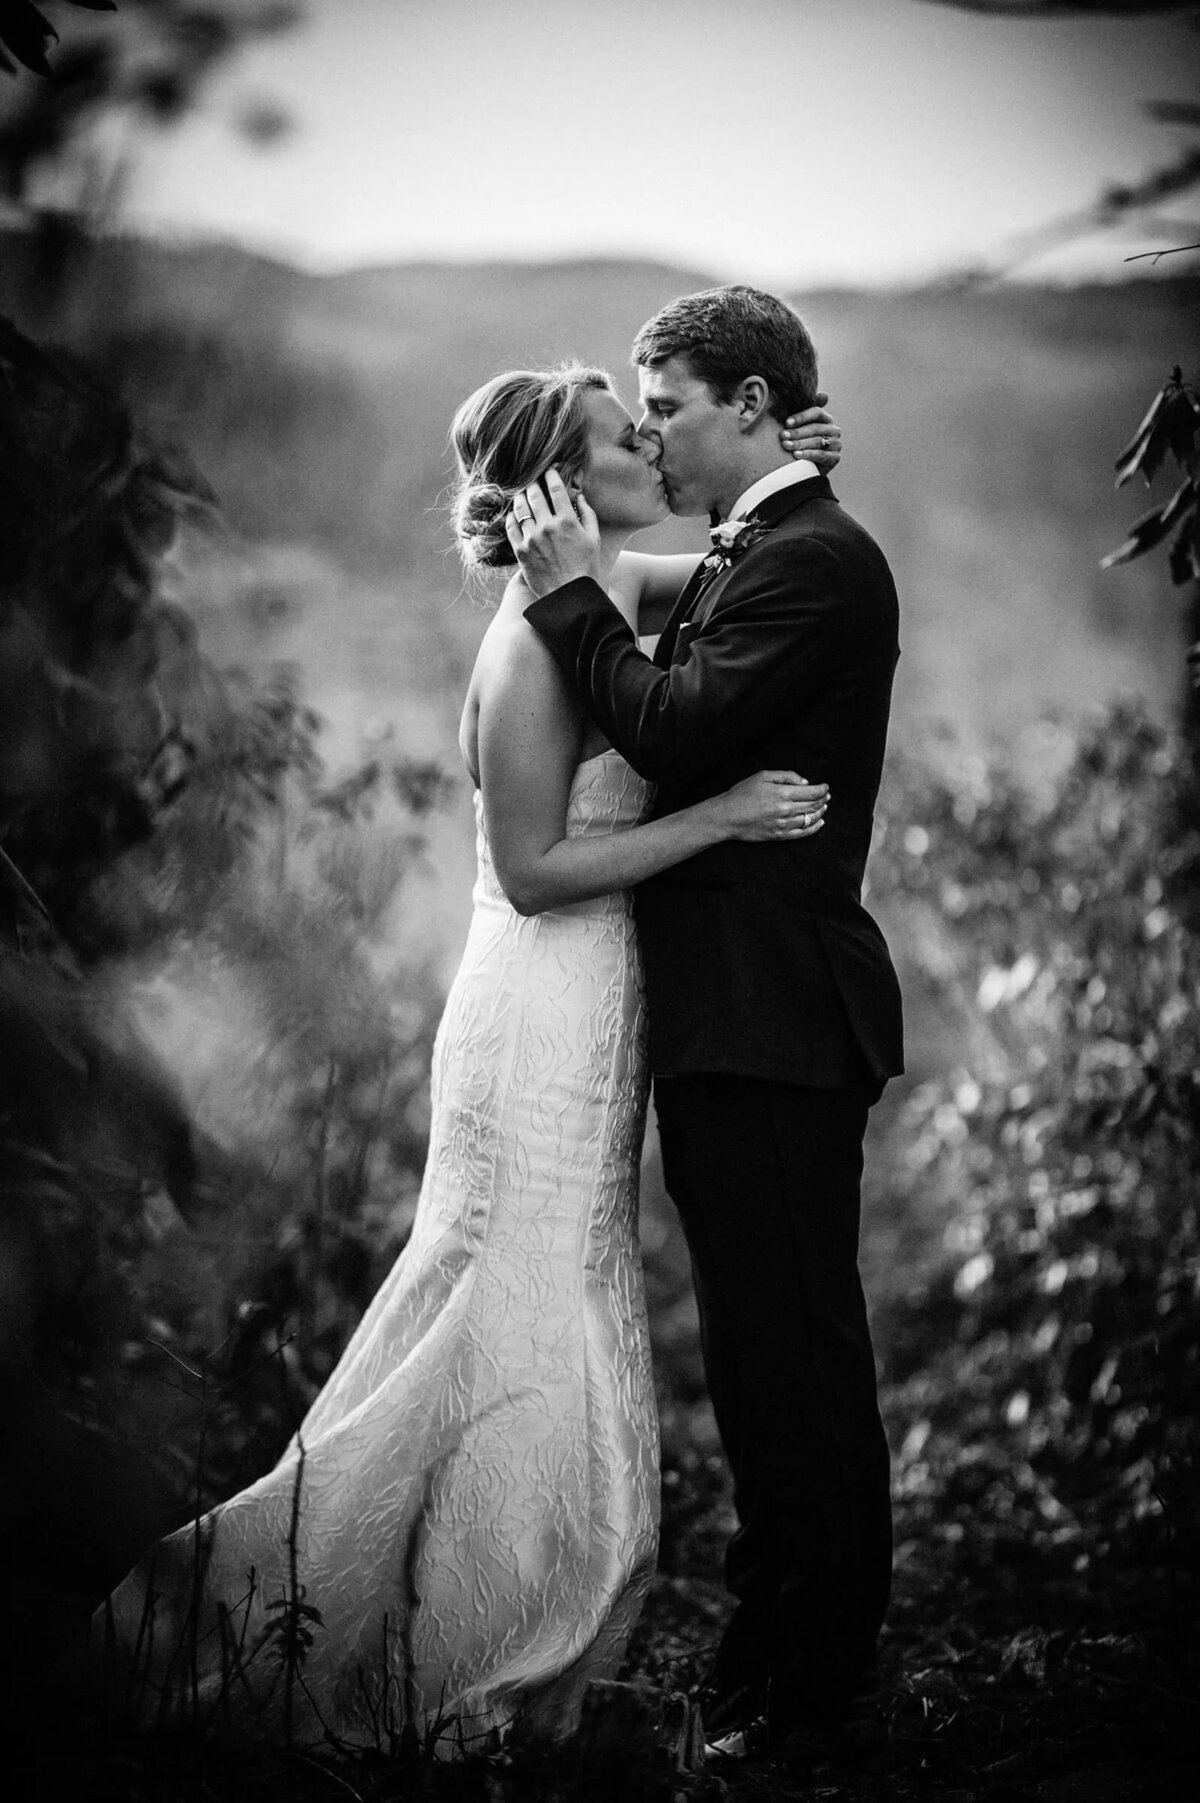 a wedding couple kissing in black and white.